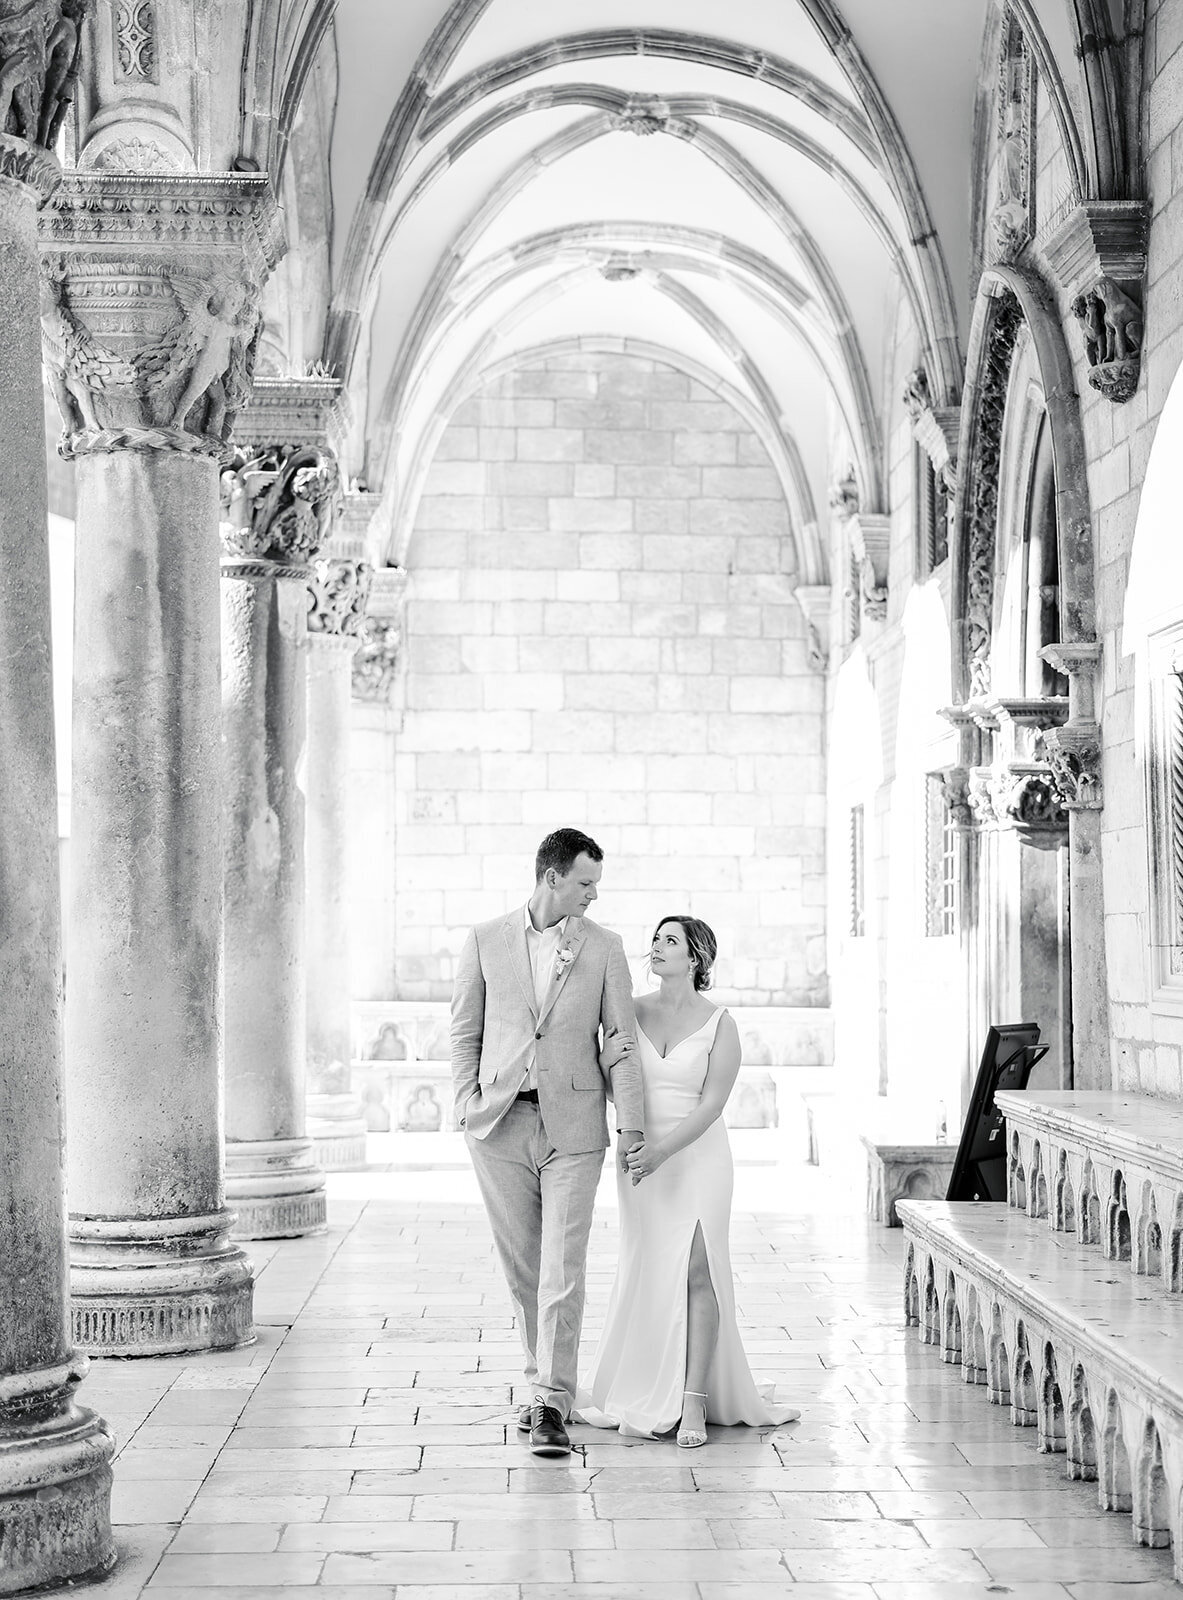 Unforgettable Luxury in Croatia: Immerse yourself in the enchanting beauty of a luxury destination wedding in Croatia through our captivating image gallery. These carefully curated images epitomize the timeless charm and sophistication that can be achieved. Trust our high-end wedding planner to curate a flawless celebration, ensuring every detail is meticulously executed for an unforgettable experience.